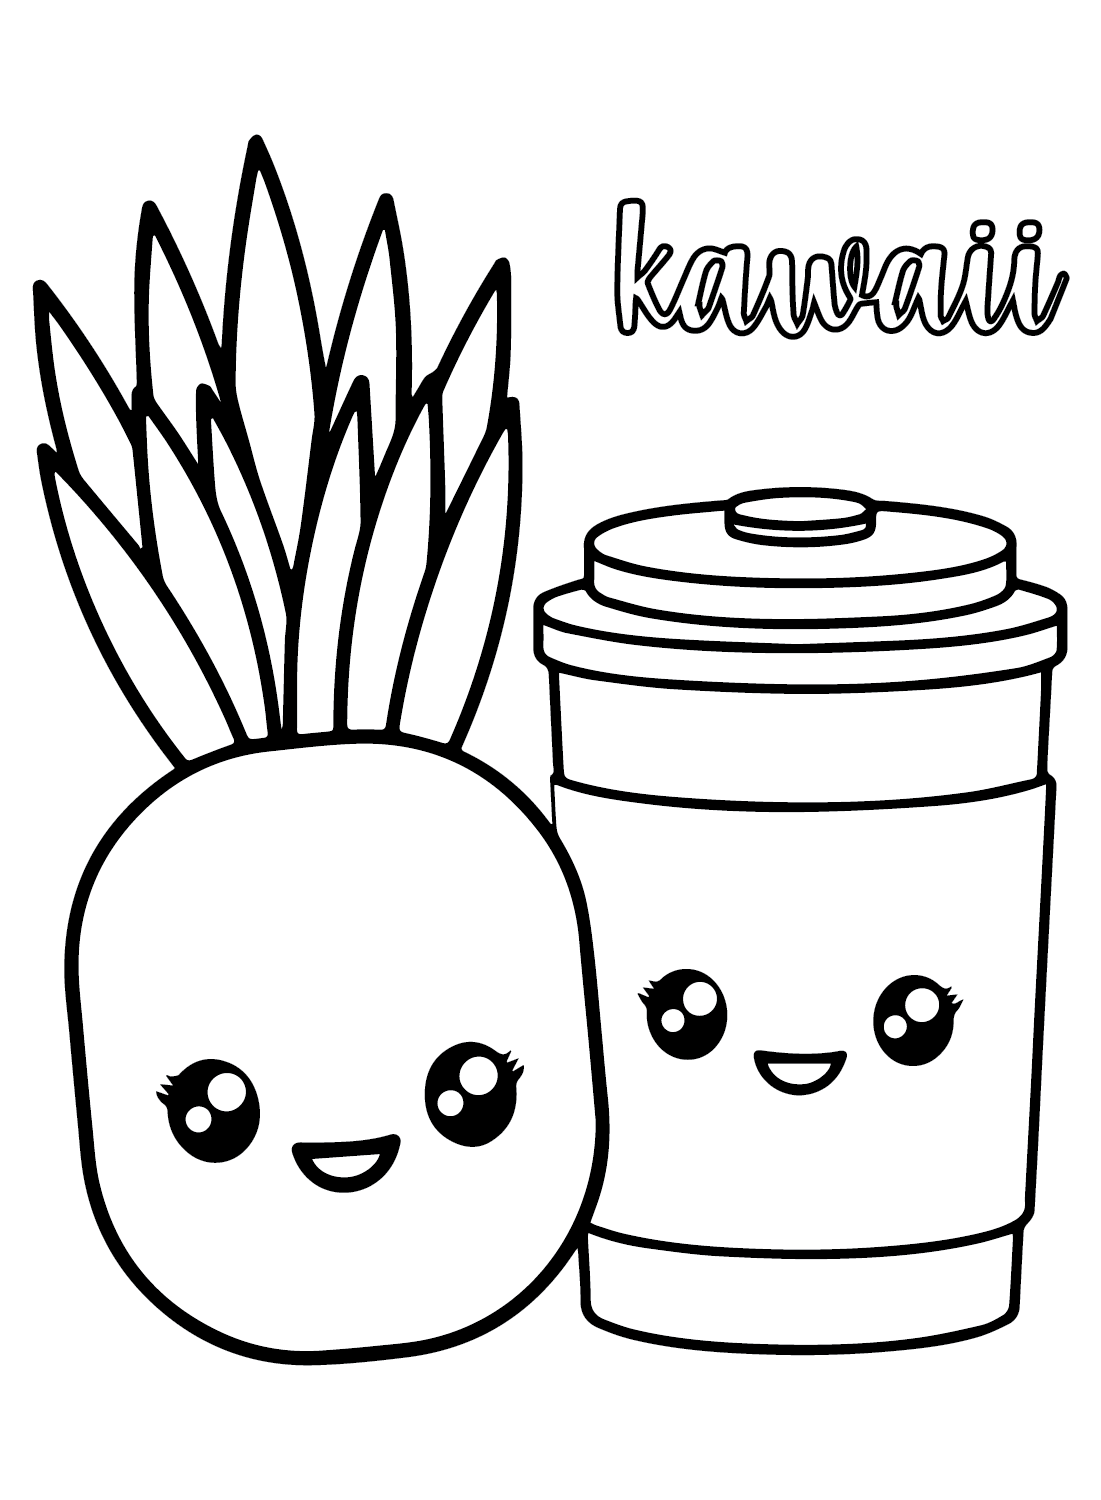 Abacaxi Kawaii from Abacaxi